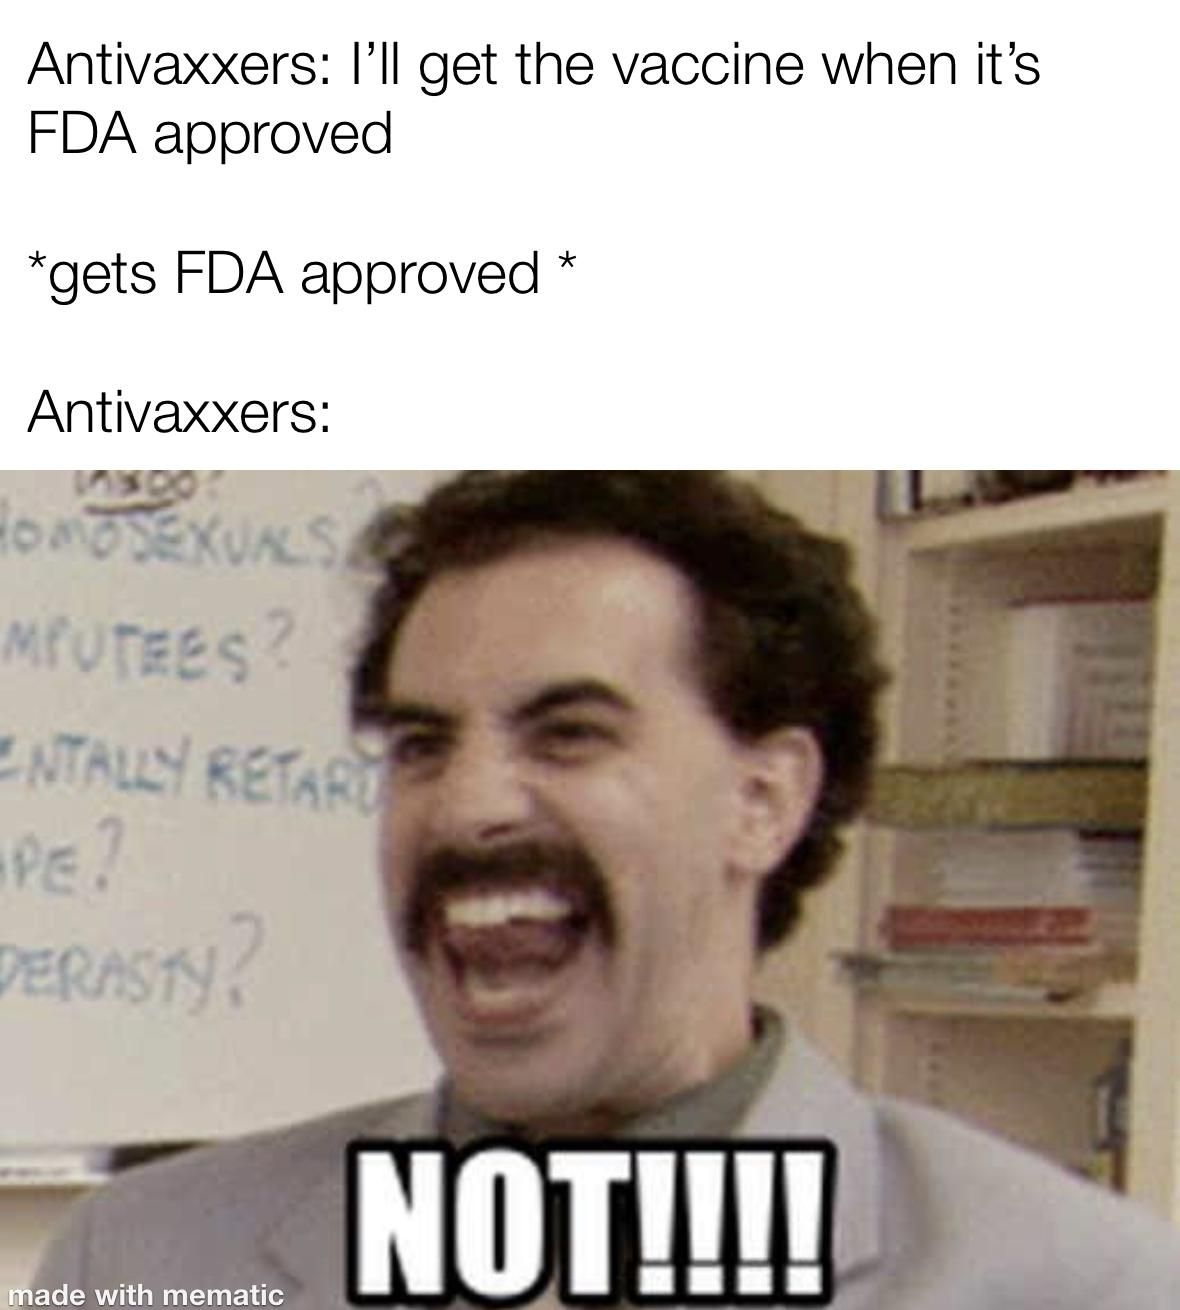 The vaccine is good not